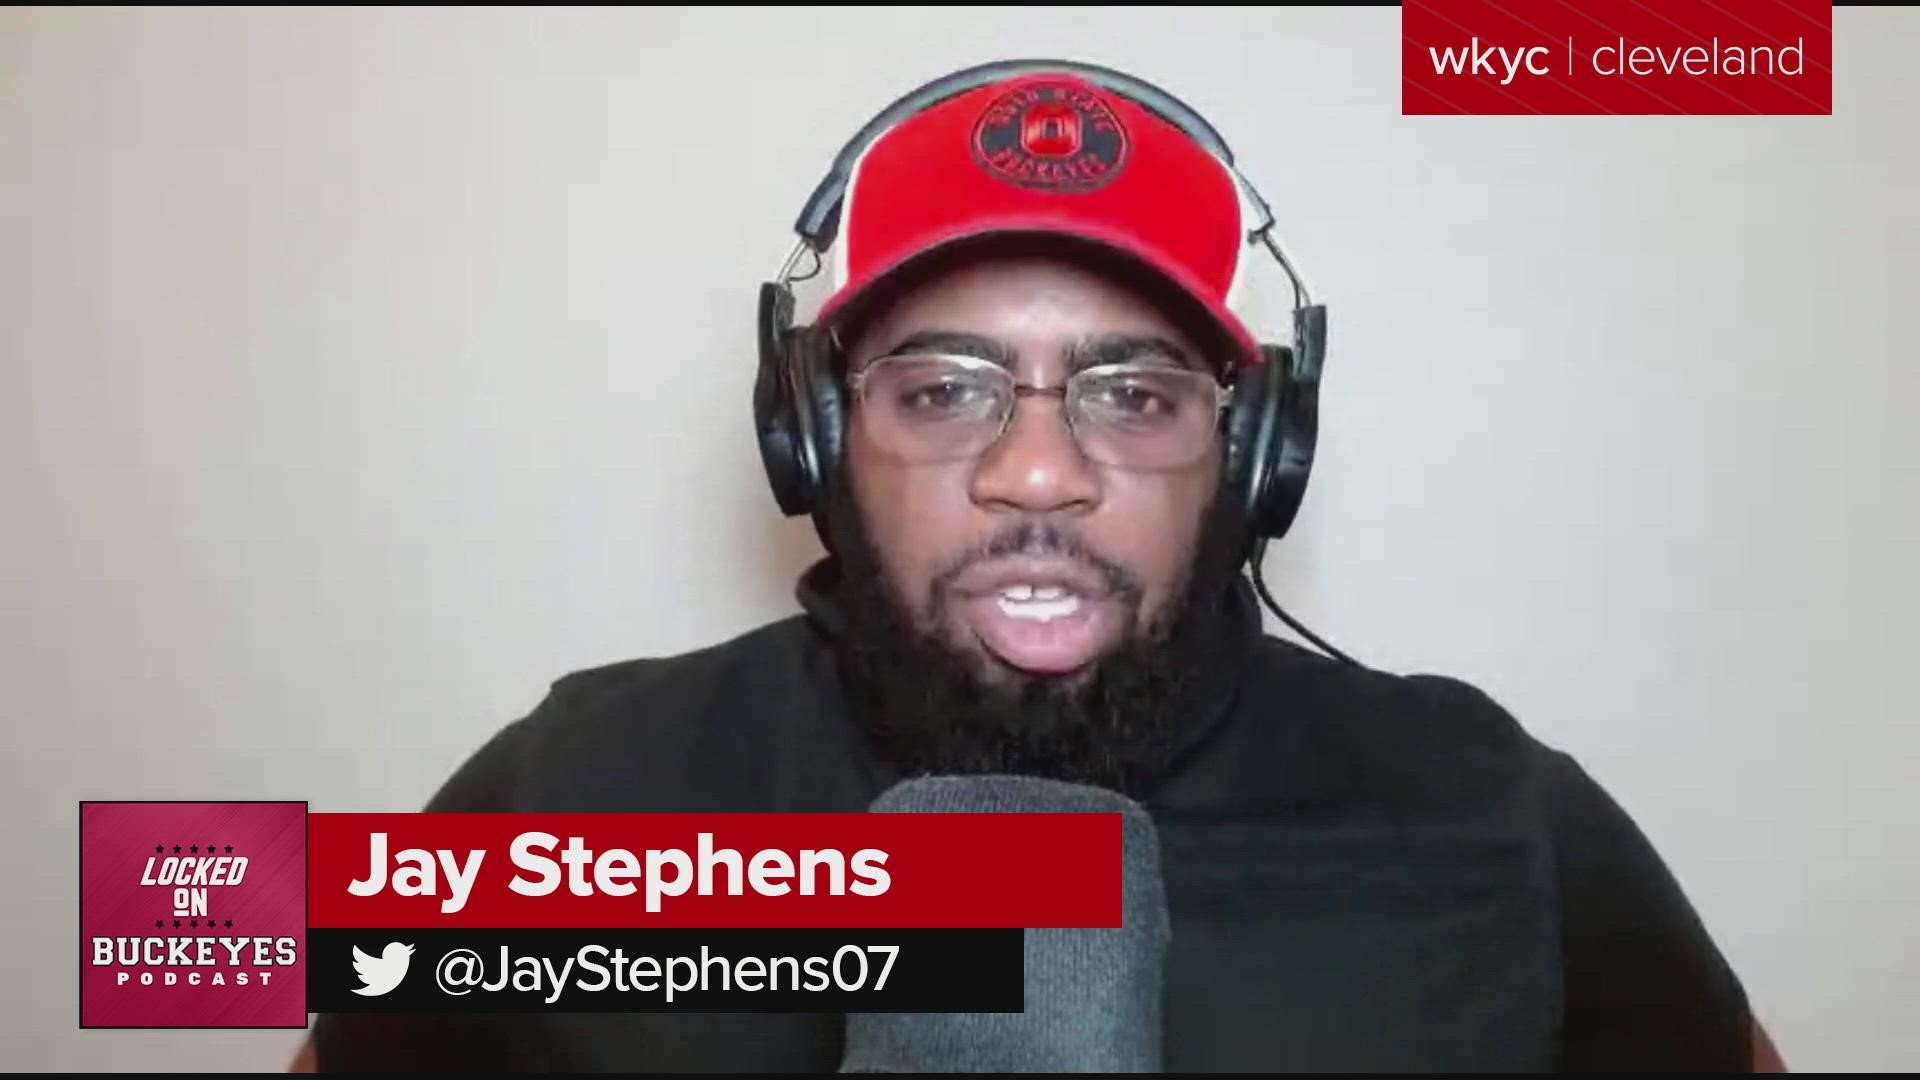 Jay Stephens has the keys to the game in this edition of Locked On Buckeyes Podcast.